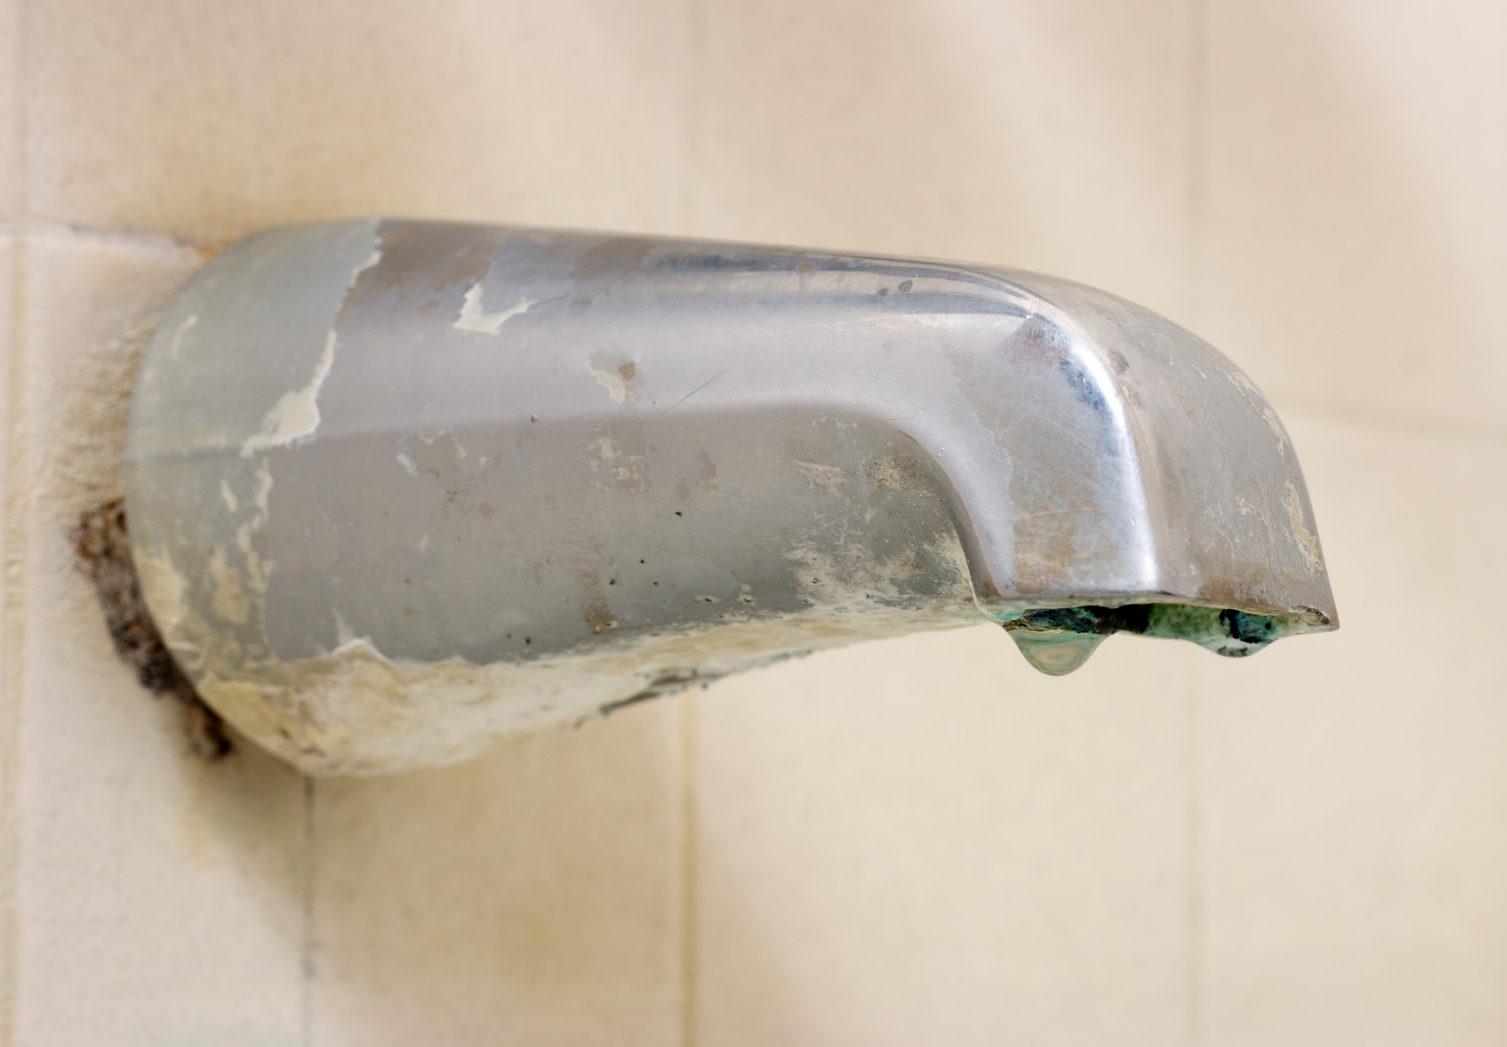 How to Remove a Stuck or Rusted Tub Spout